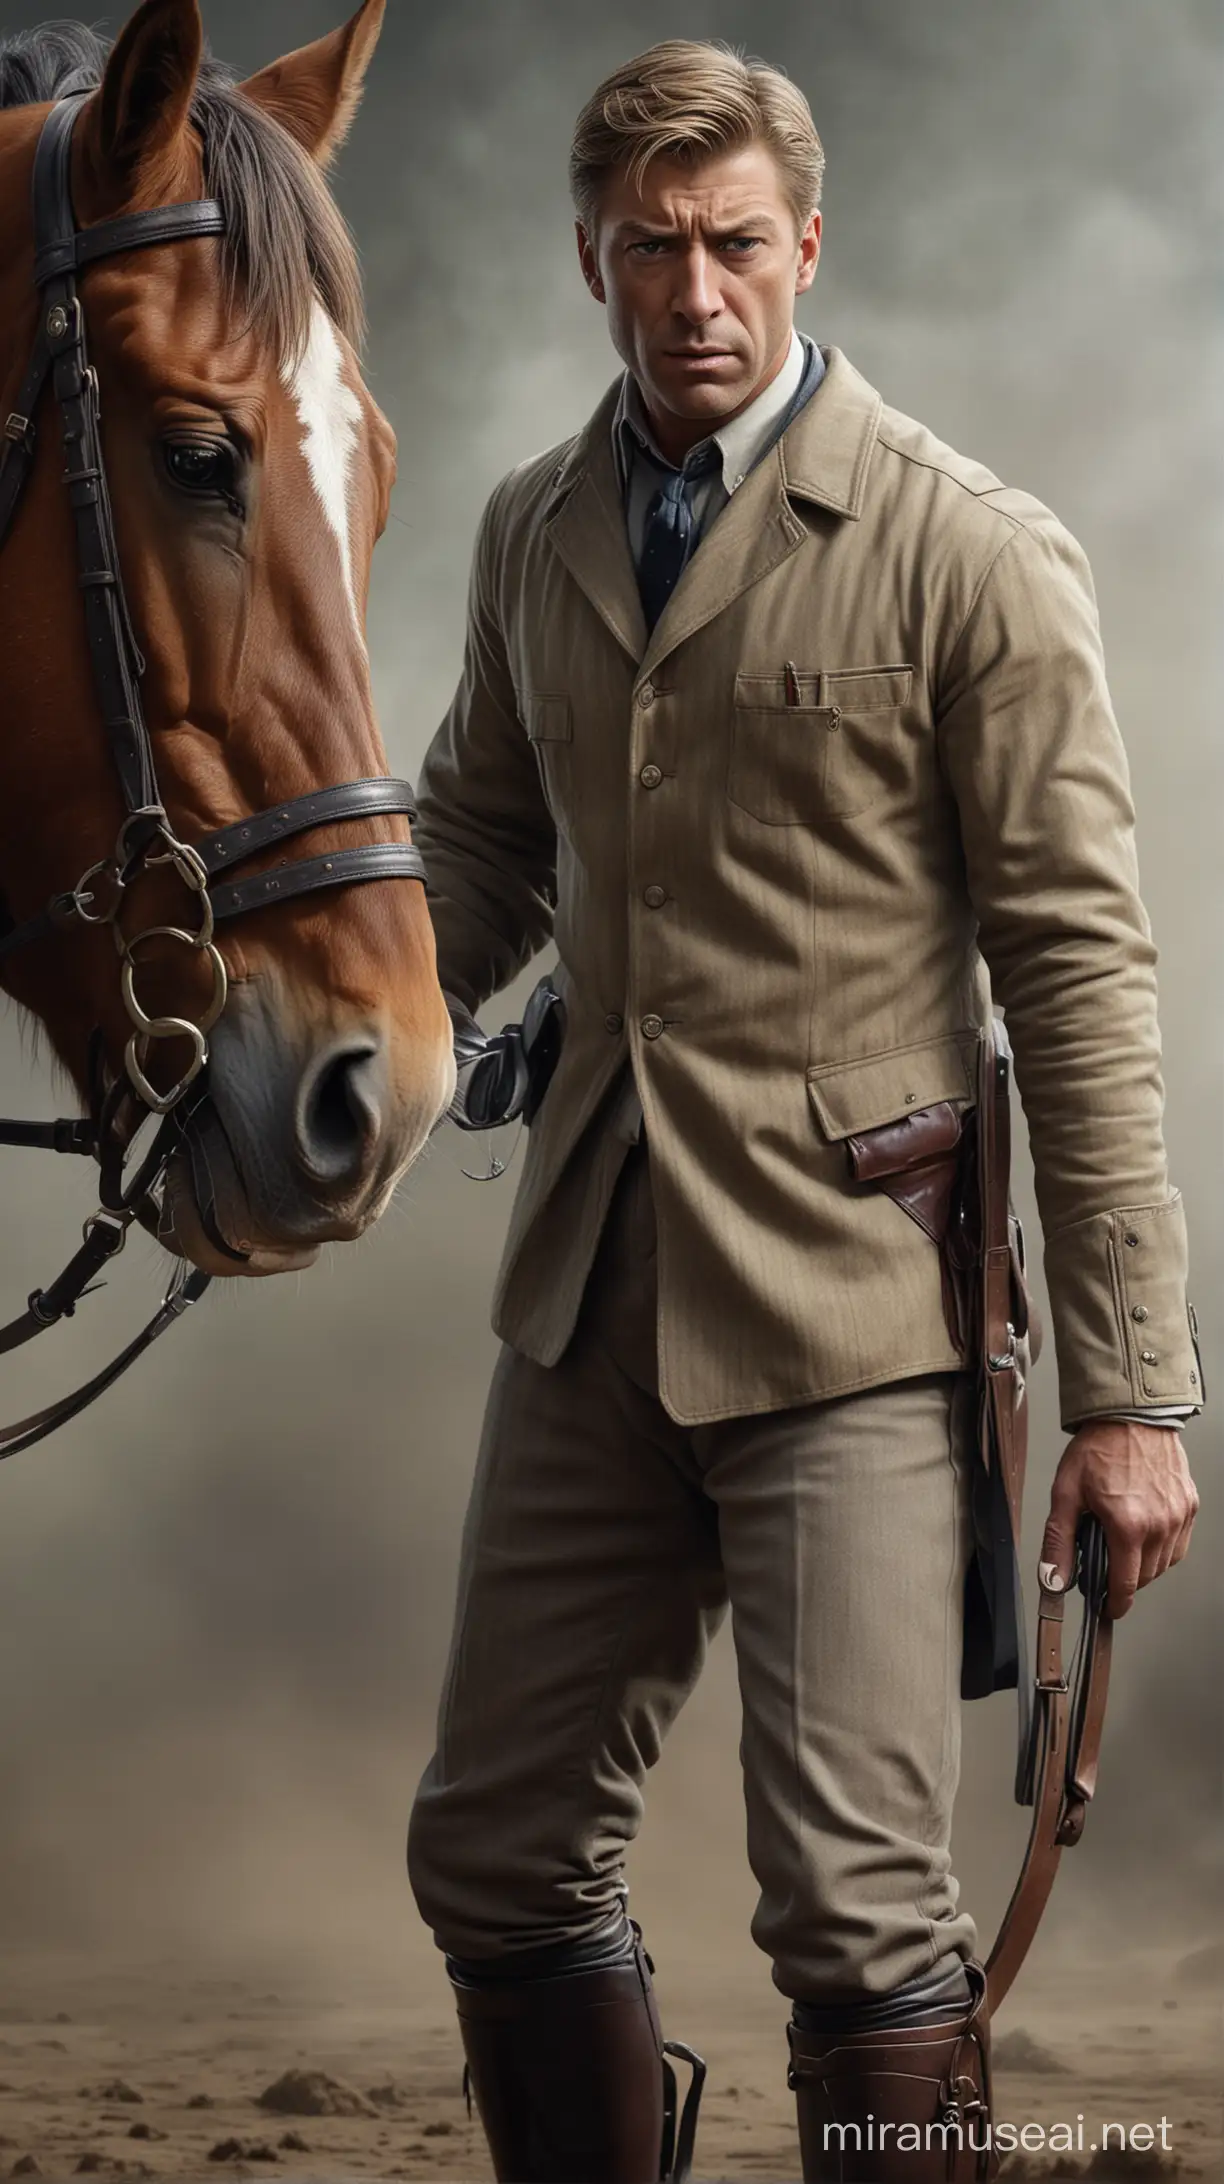 Close-up of Baldwin's determined expression as he commands his horse with his knees. hyper realistic